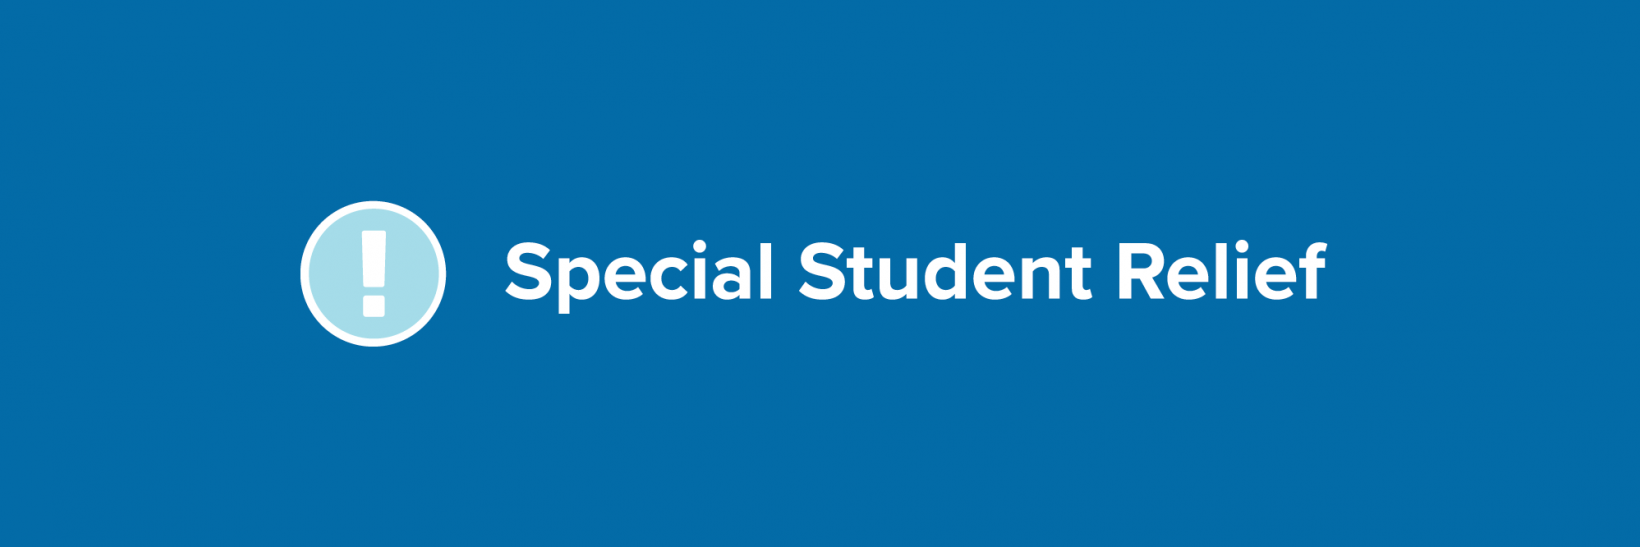 special student relief